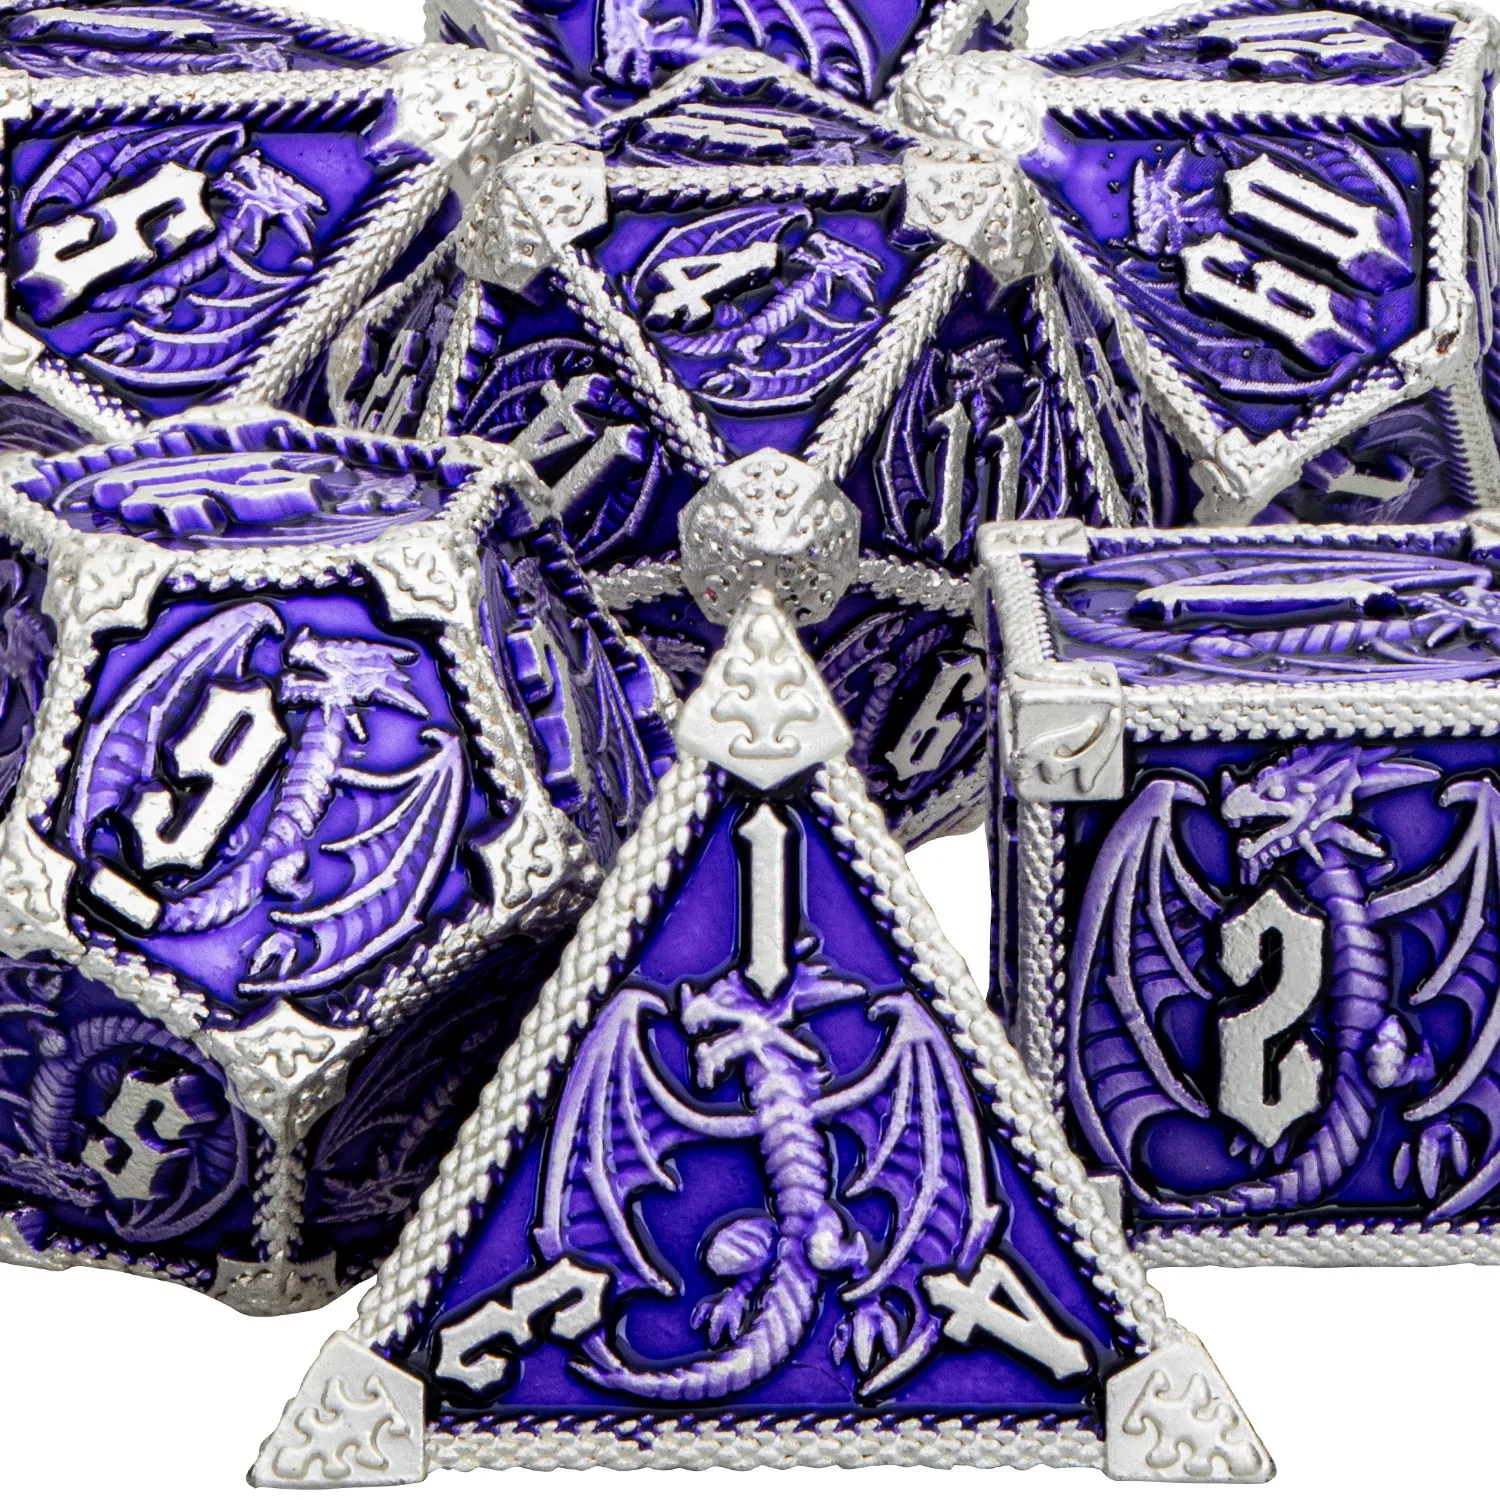 

New Purple DND Metal Polyhedral Dragon Dice Set For Dungeon and Dragon Pathfinder Role Playing D20 D12 D10 D% D8 D6 D4 Dice Set